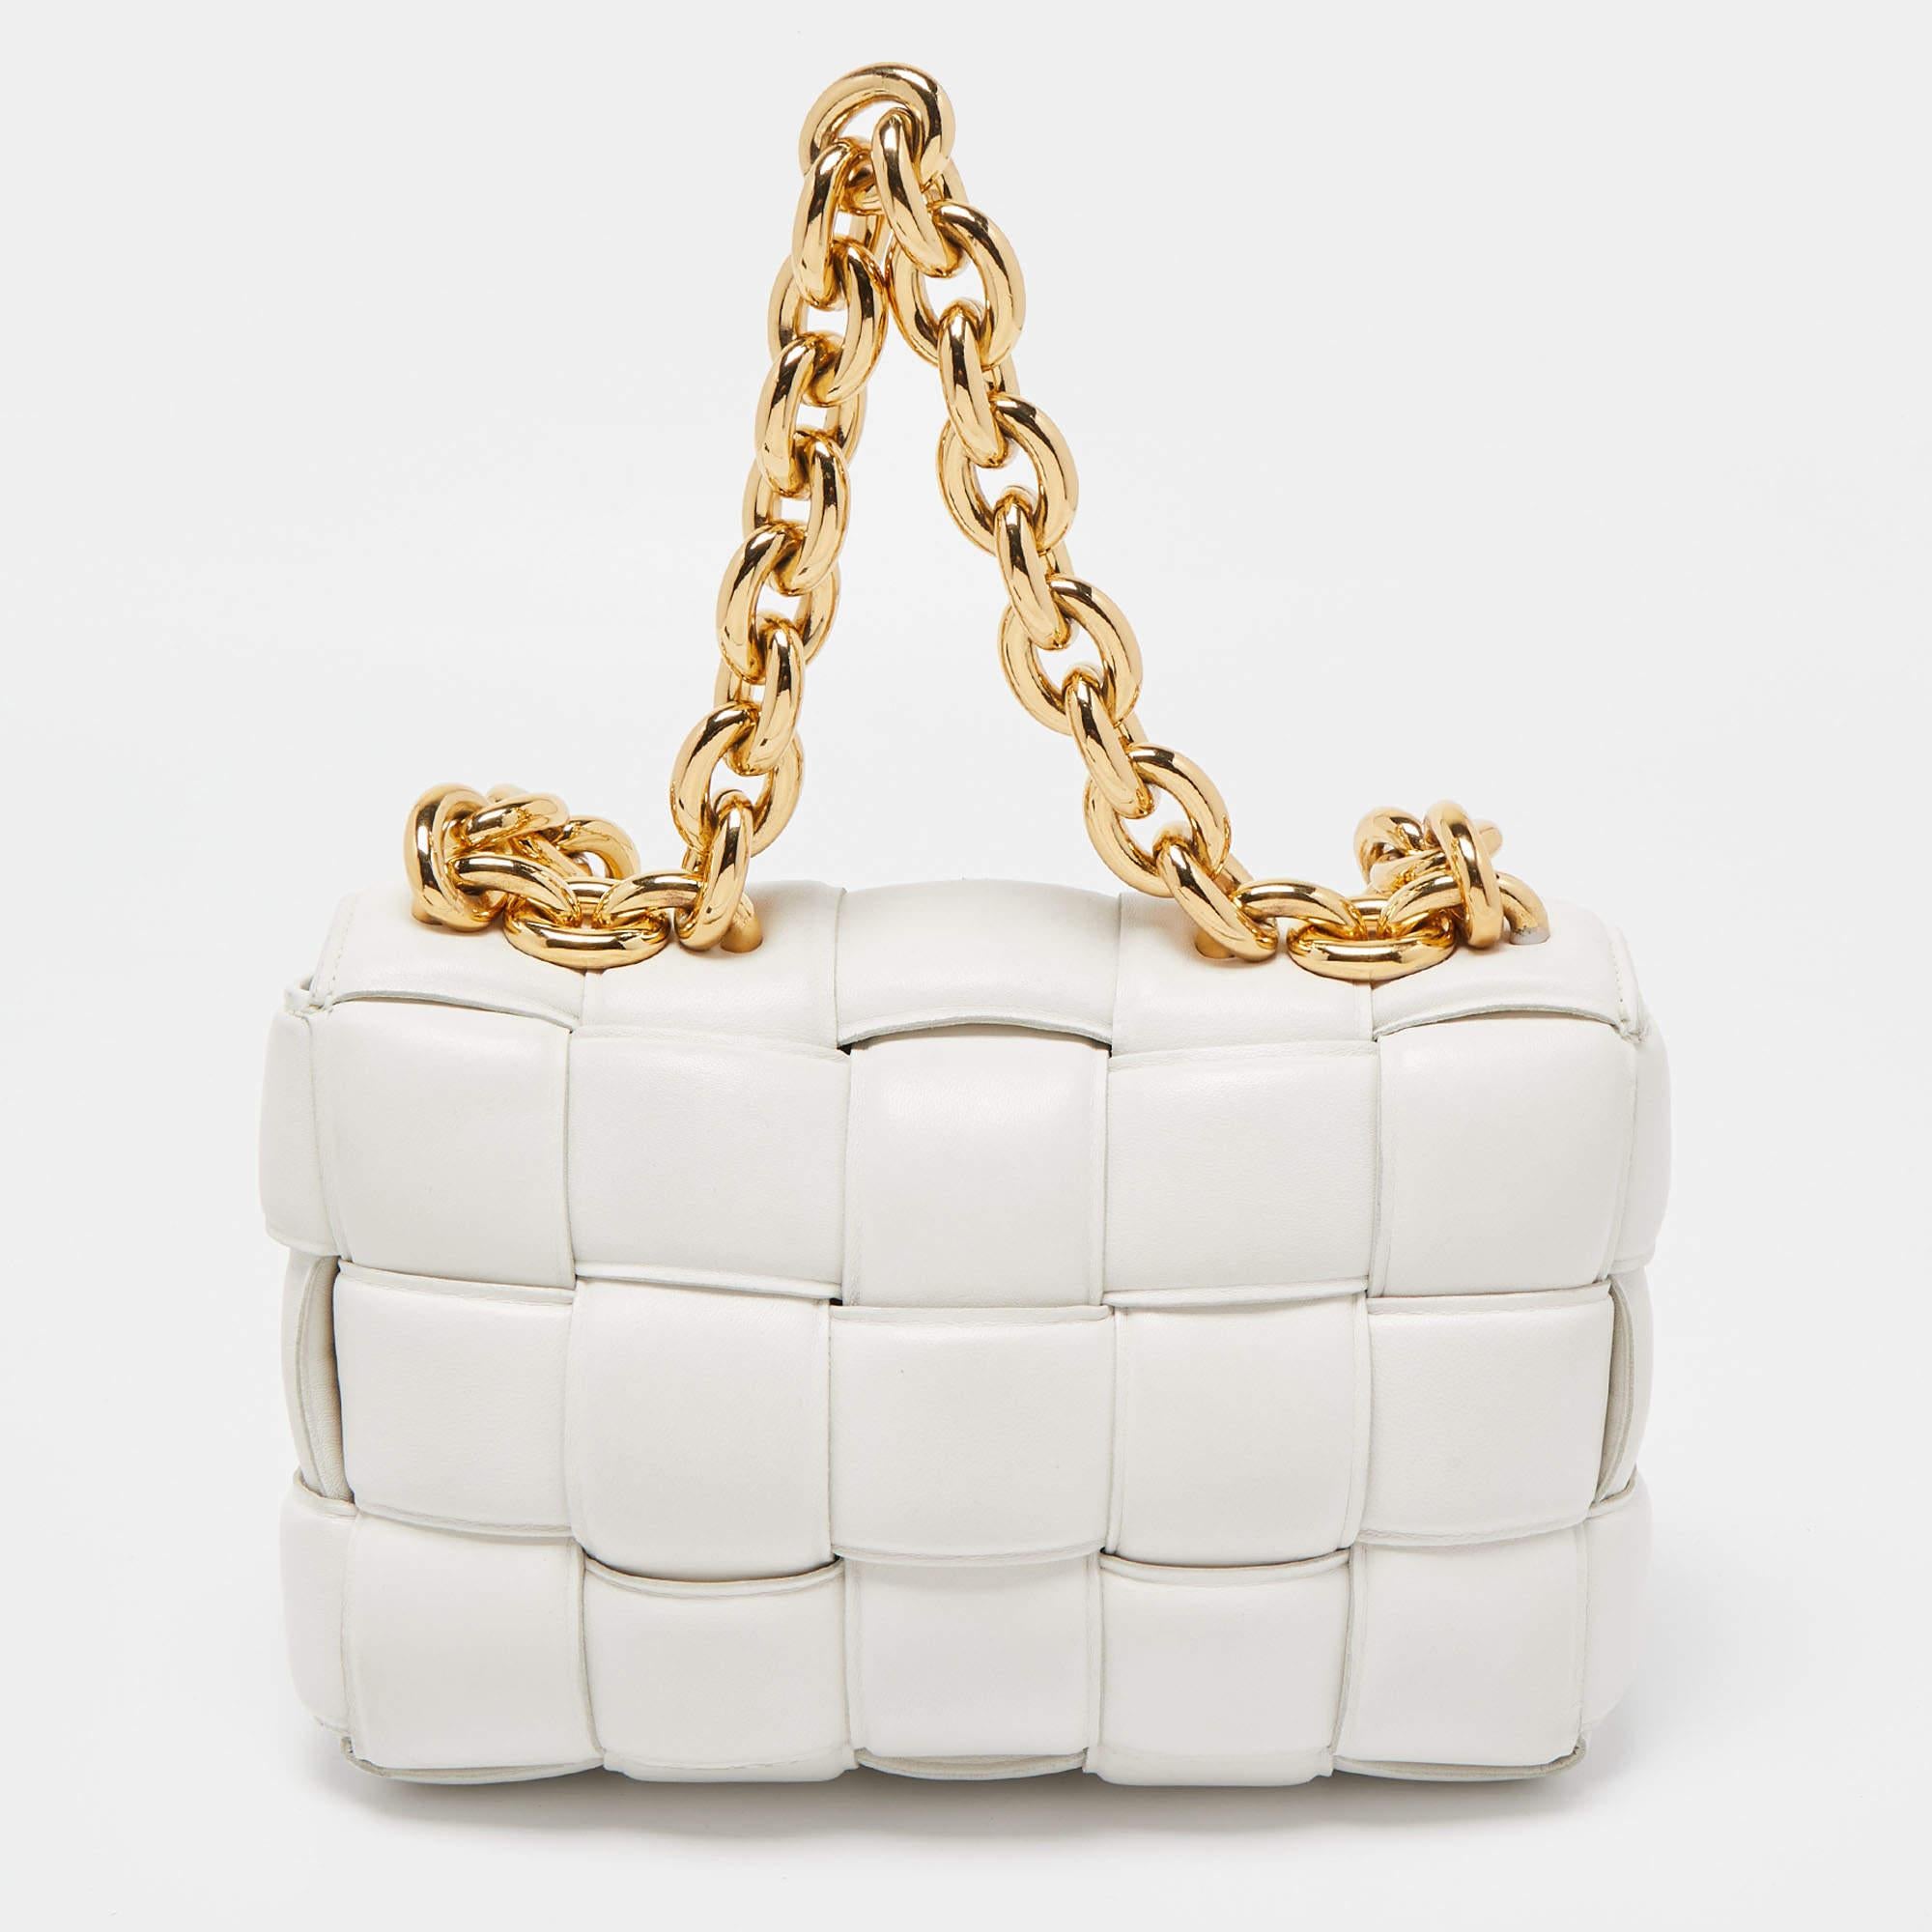 Indulge in luxury with this Bottega Veneta white Cassette bag. Meticulously crafted from premium materials, it combines exquisite design, impeccable craftsmanship, and timeless elegance. Elevate your style with this fashion accessory.

